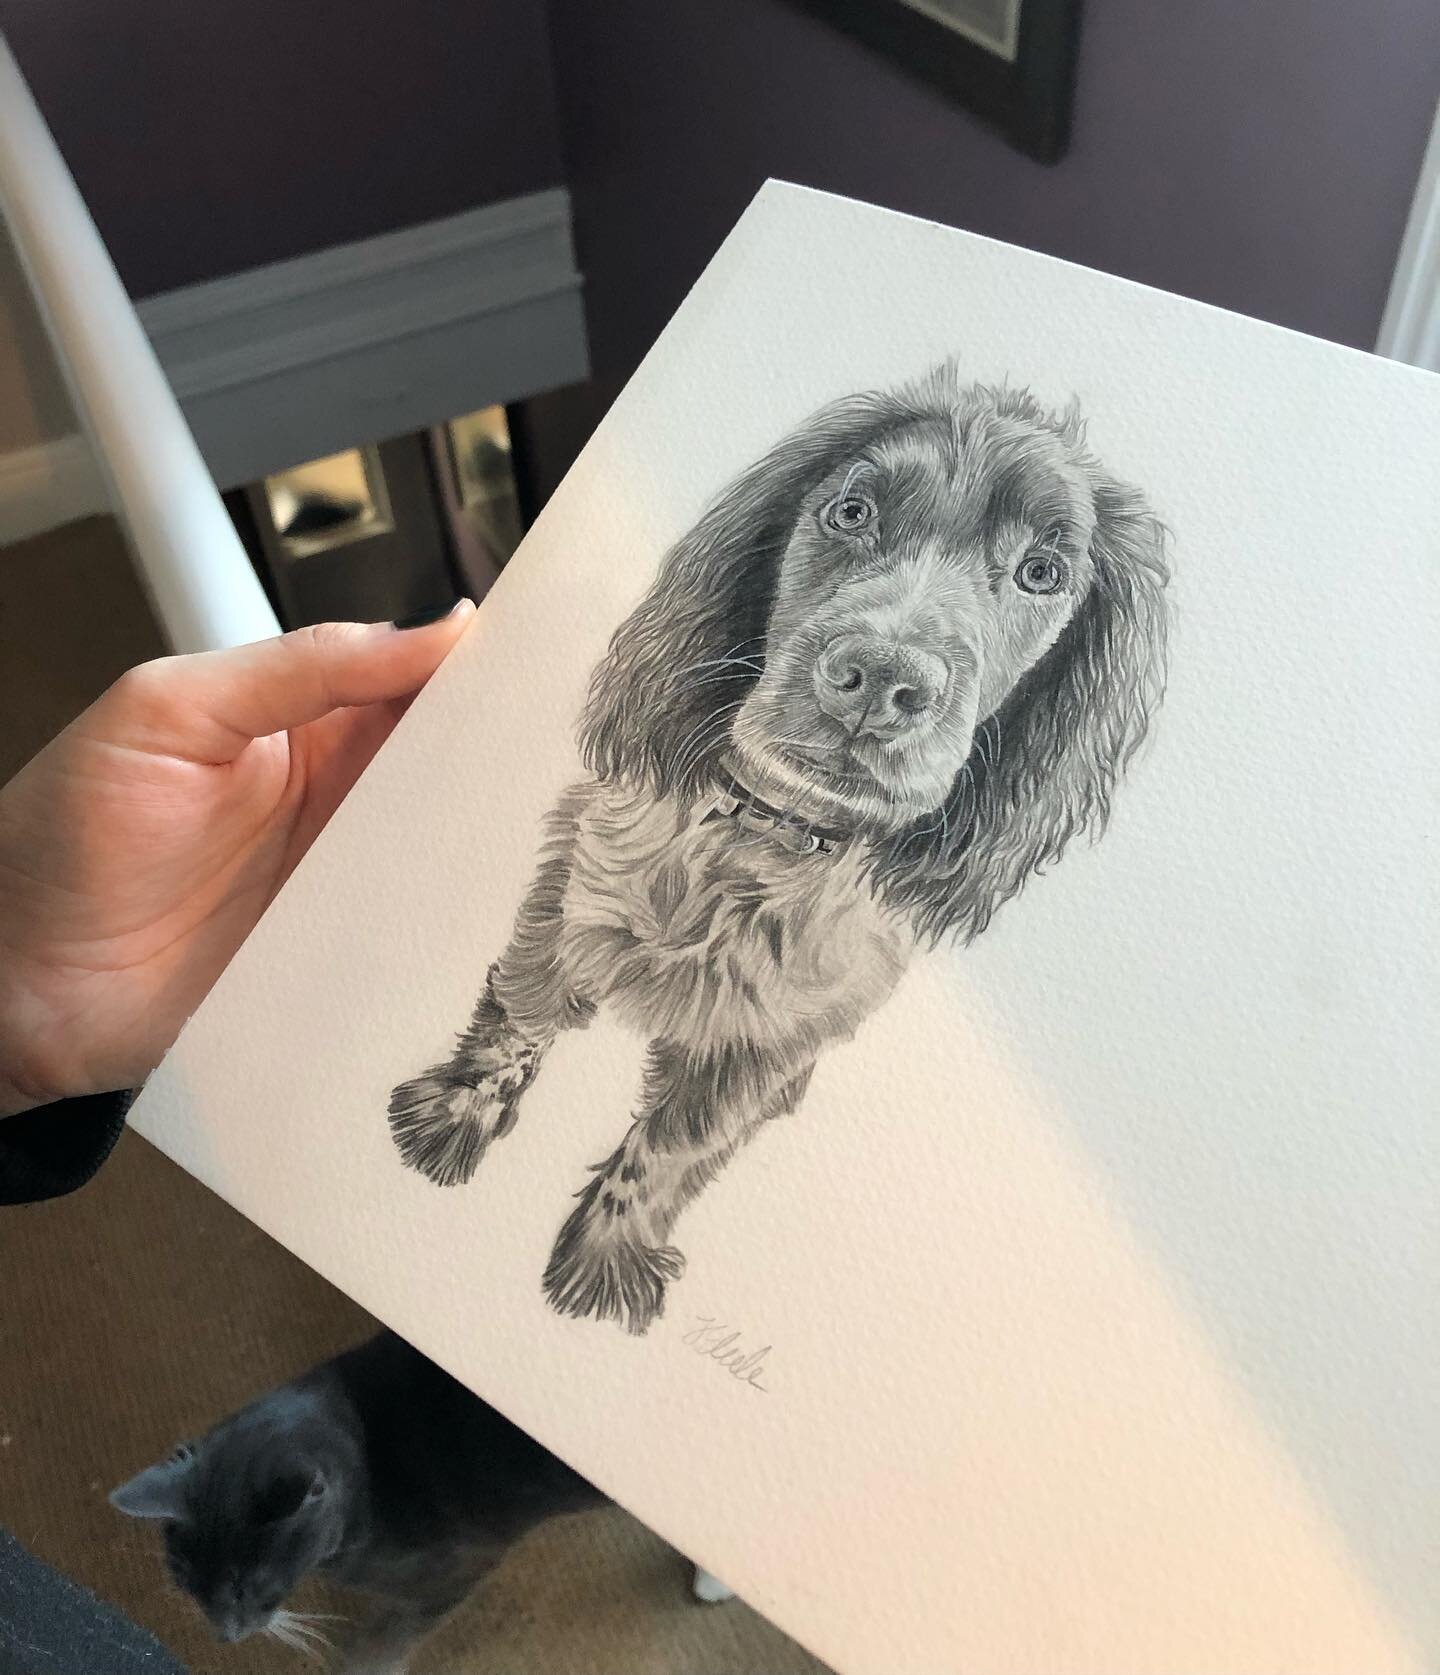 If your looking for something more affordable as a little present idea or just for yourself, I&rsquo;m looking at doing smaller drawings like Truffle here ⬆️🐶

Message me with any ideas you might have!